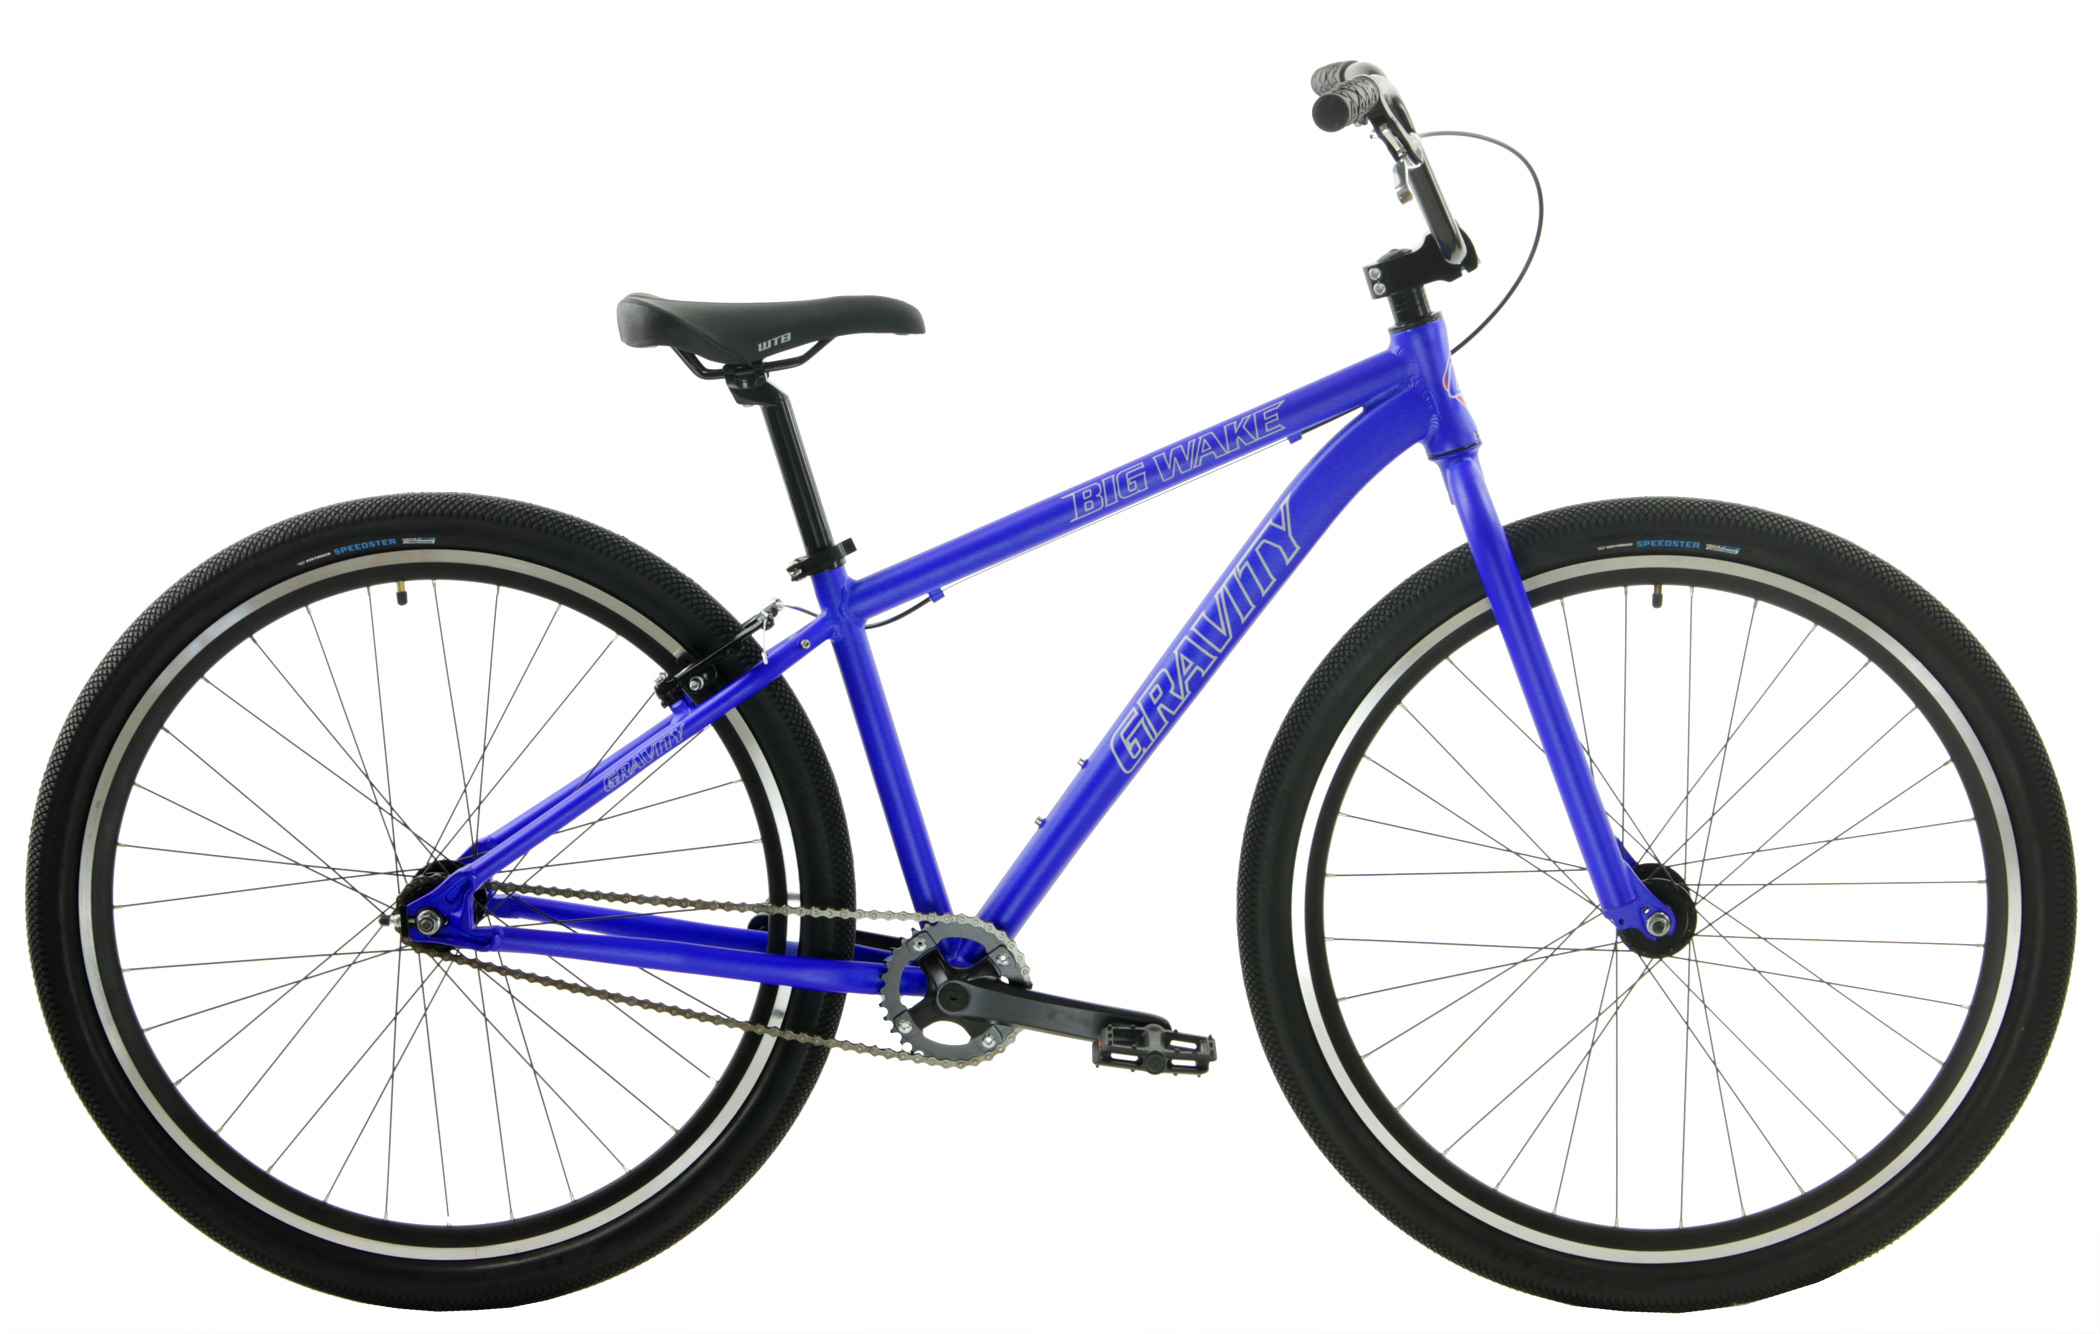 Save up to 60% off new Adult BMX ALL BIKES FREE 48 Save Up to Off Gravity Big Wake Bicycles Single Speed Adult BMX Bikes, BMX Cruiser Fast, Strong